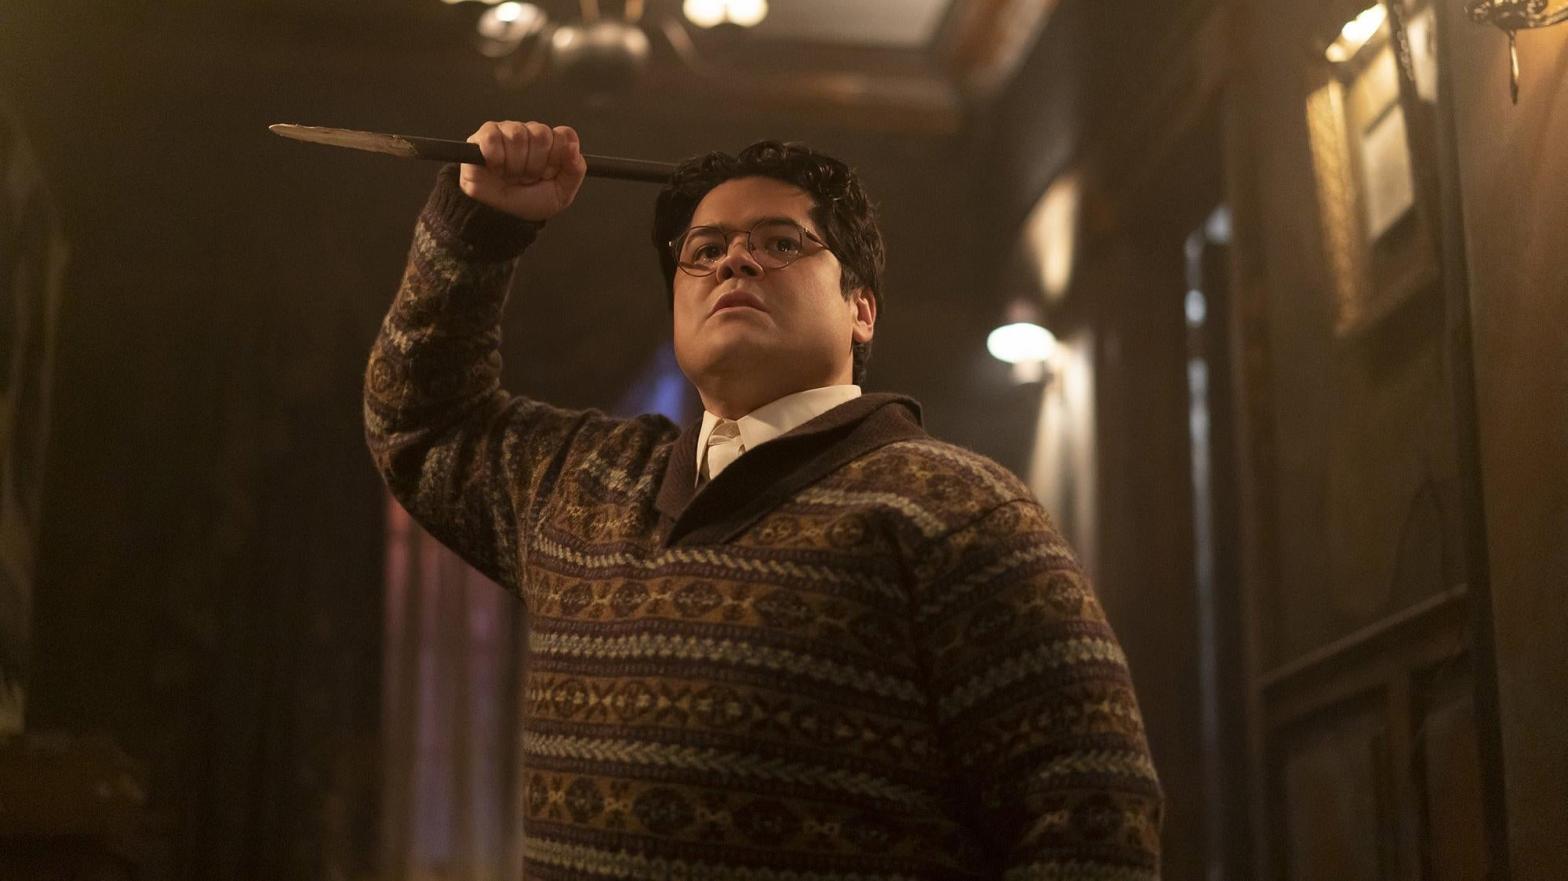 From vampire killer to DC character, Harvey Guillen has a new role. (Image: FX)